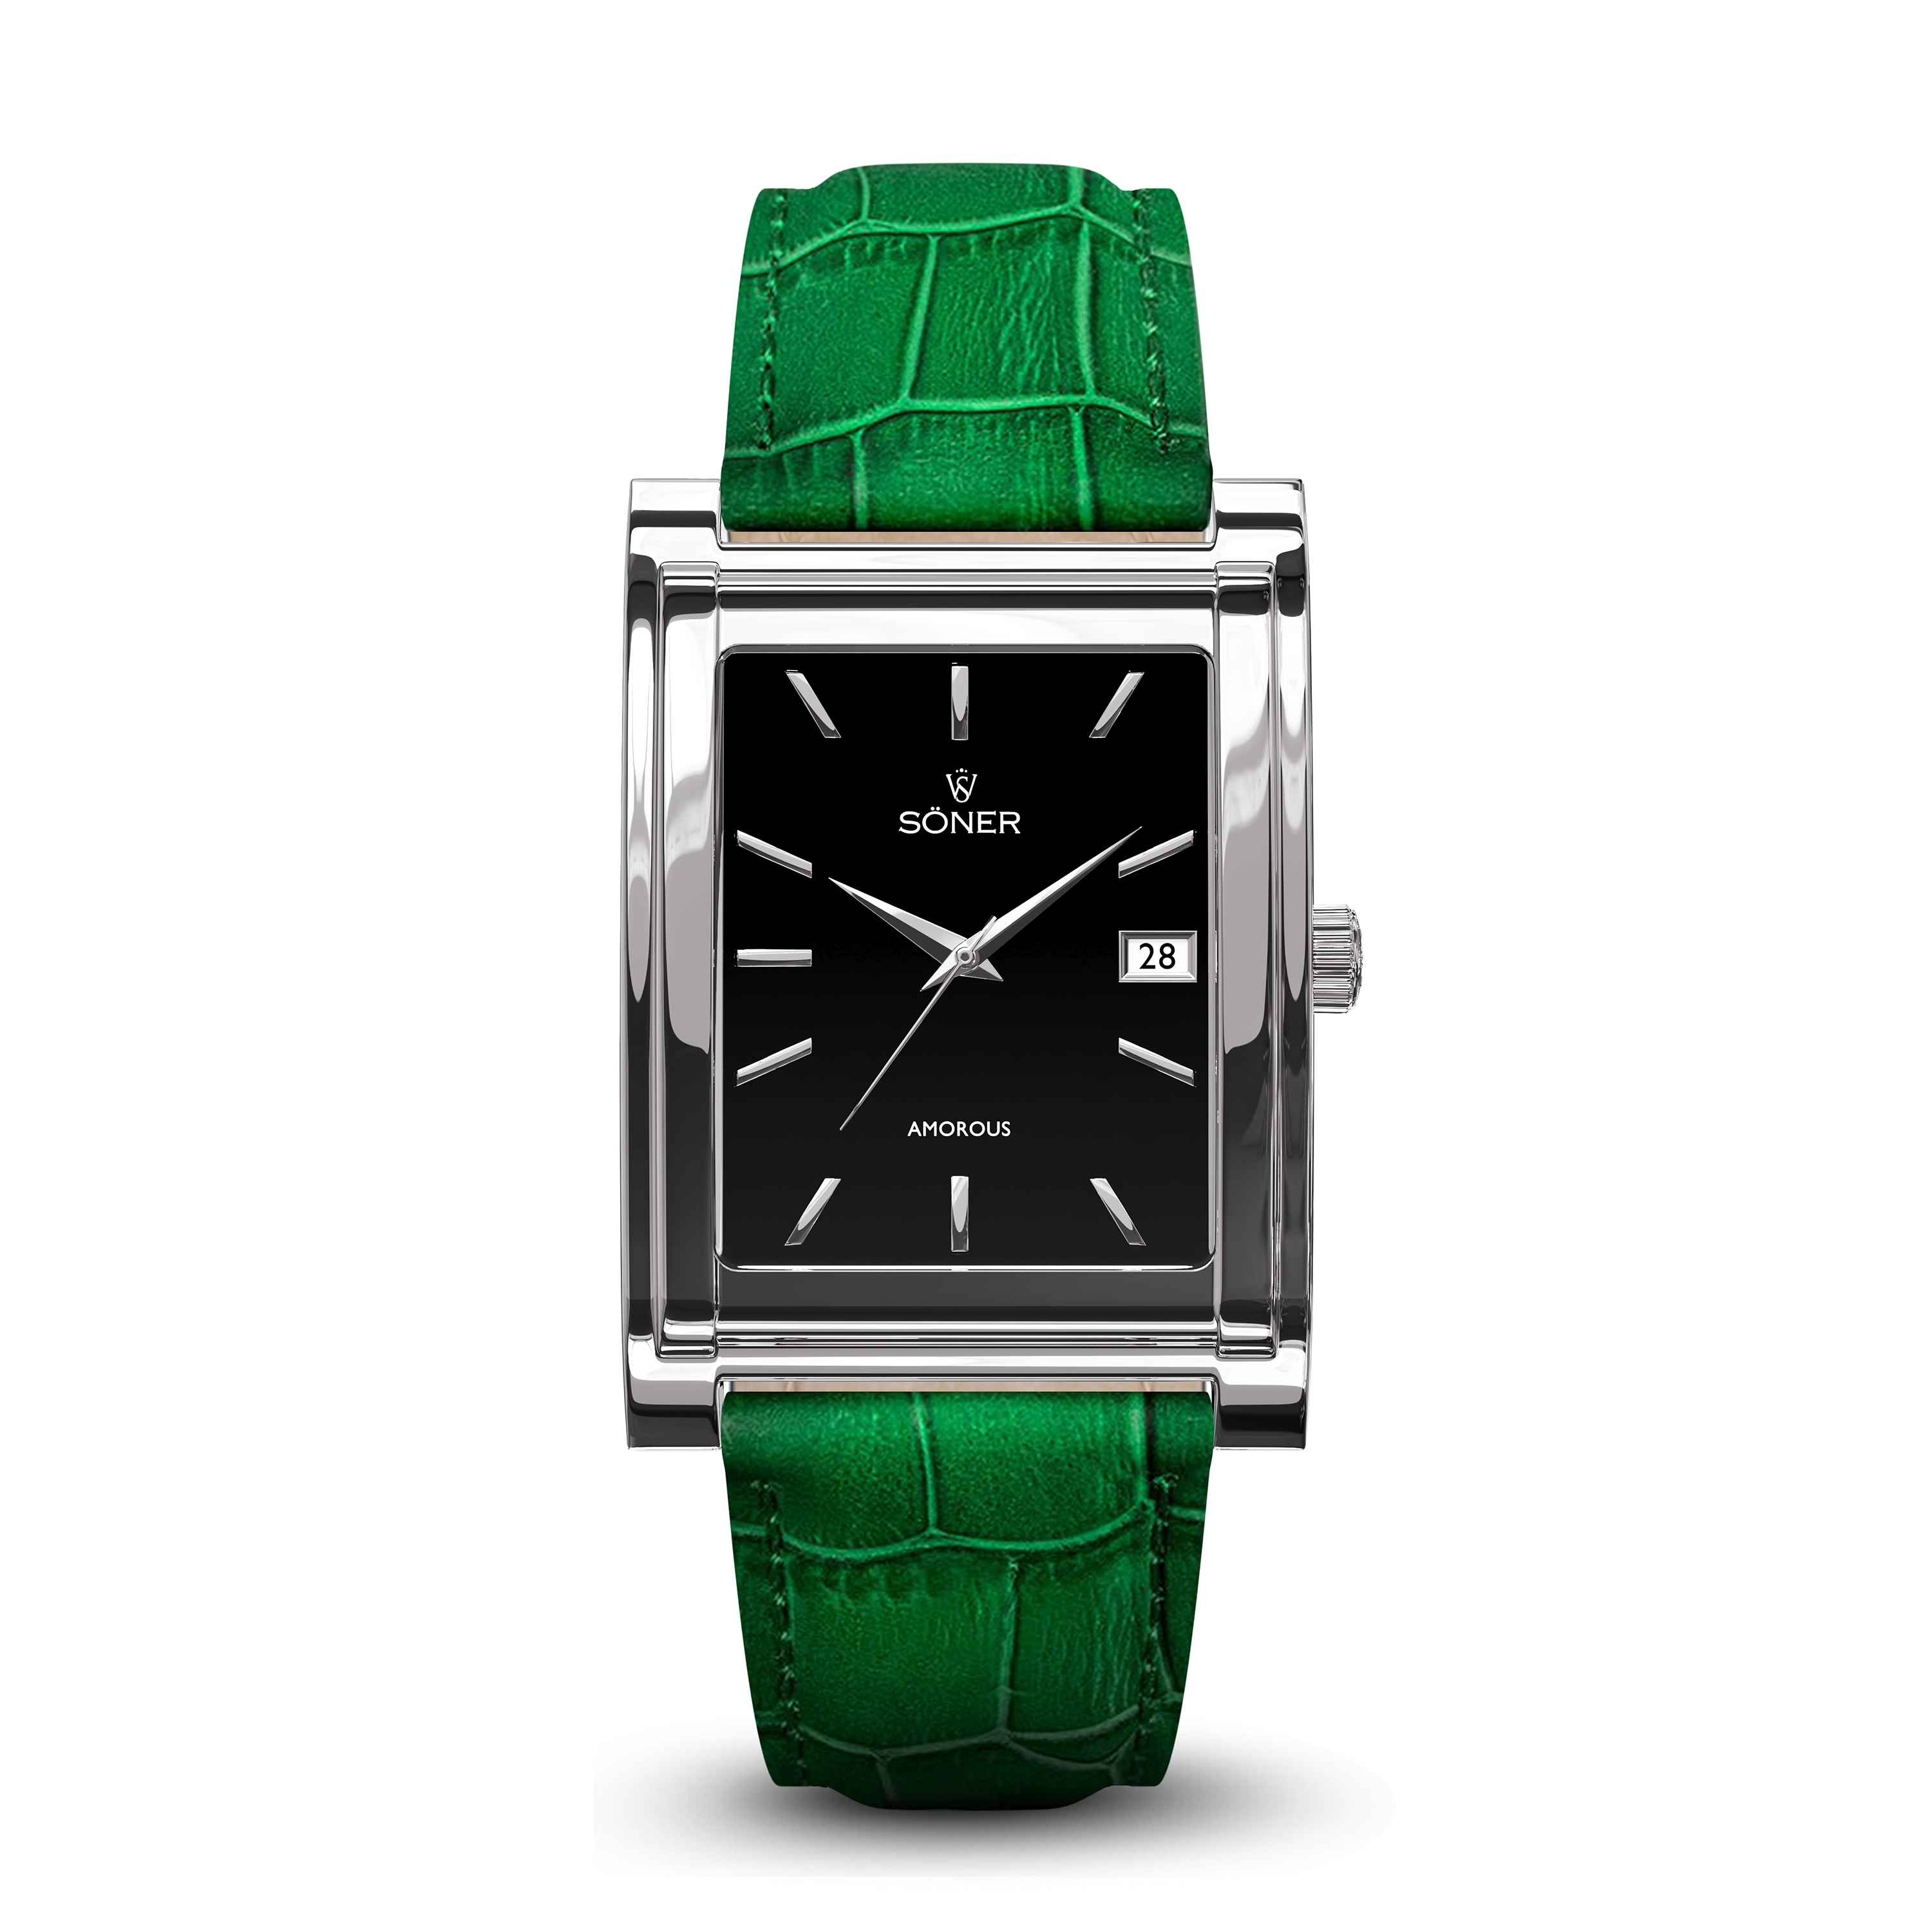 Square automatic watch, Amorous Barcelona with black dial - green alligator pattern leather strap front view